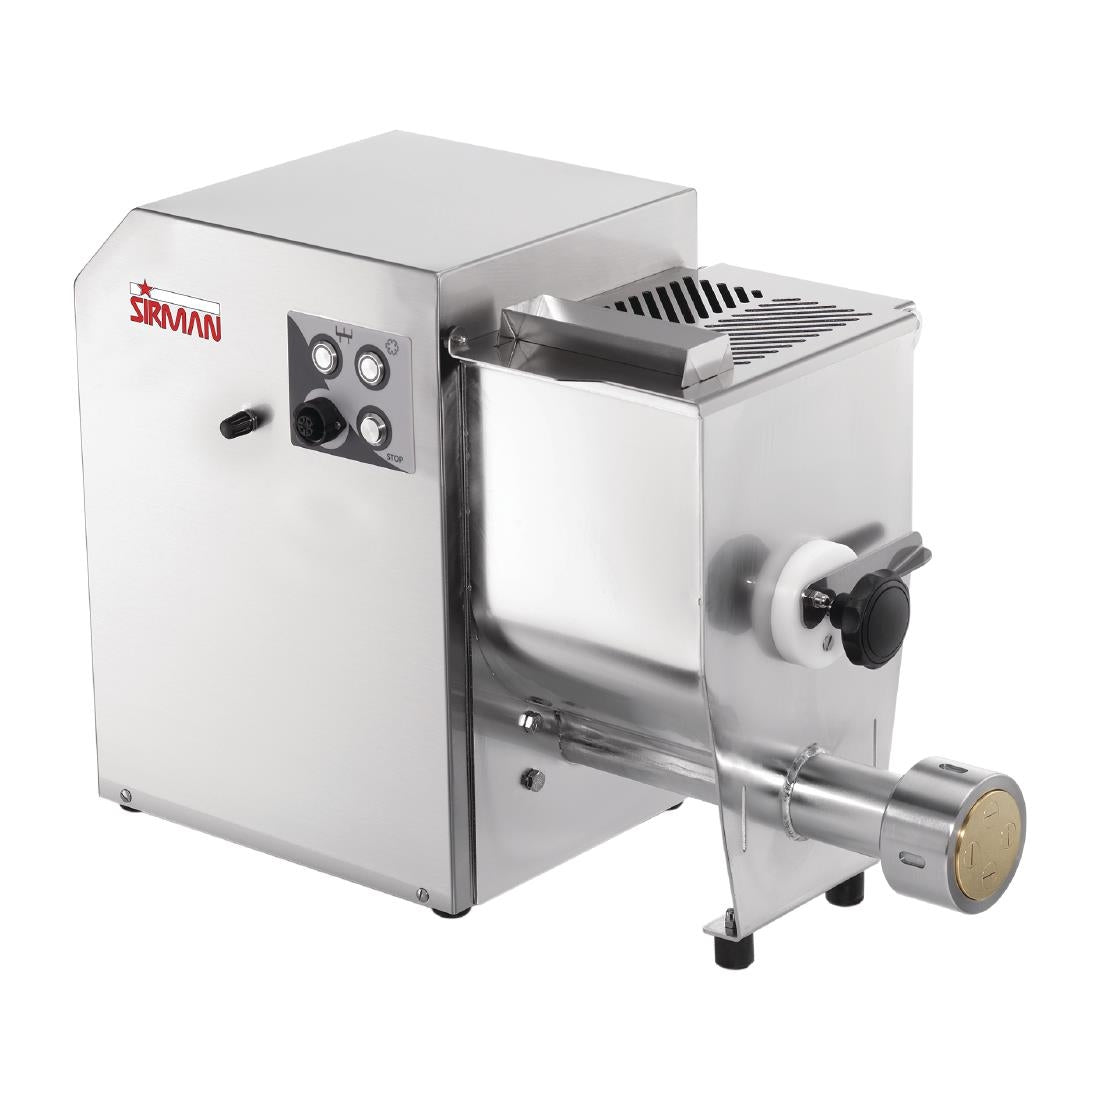 DM689-TAG Sirman Concerto 5 Pasta Machine with Tagliatelle 6mm Die JD Catering Equipment Solutions Ltd